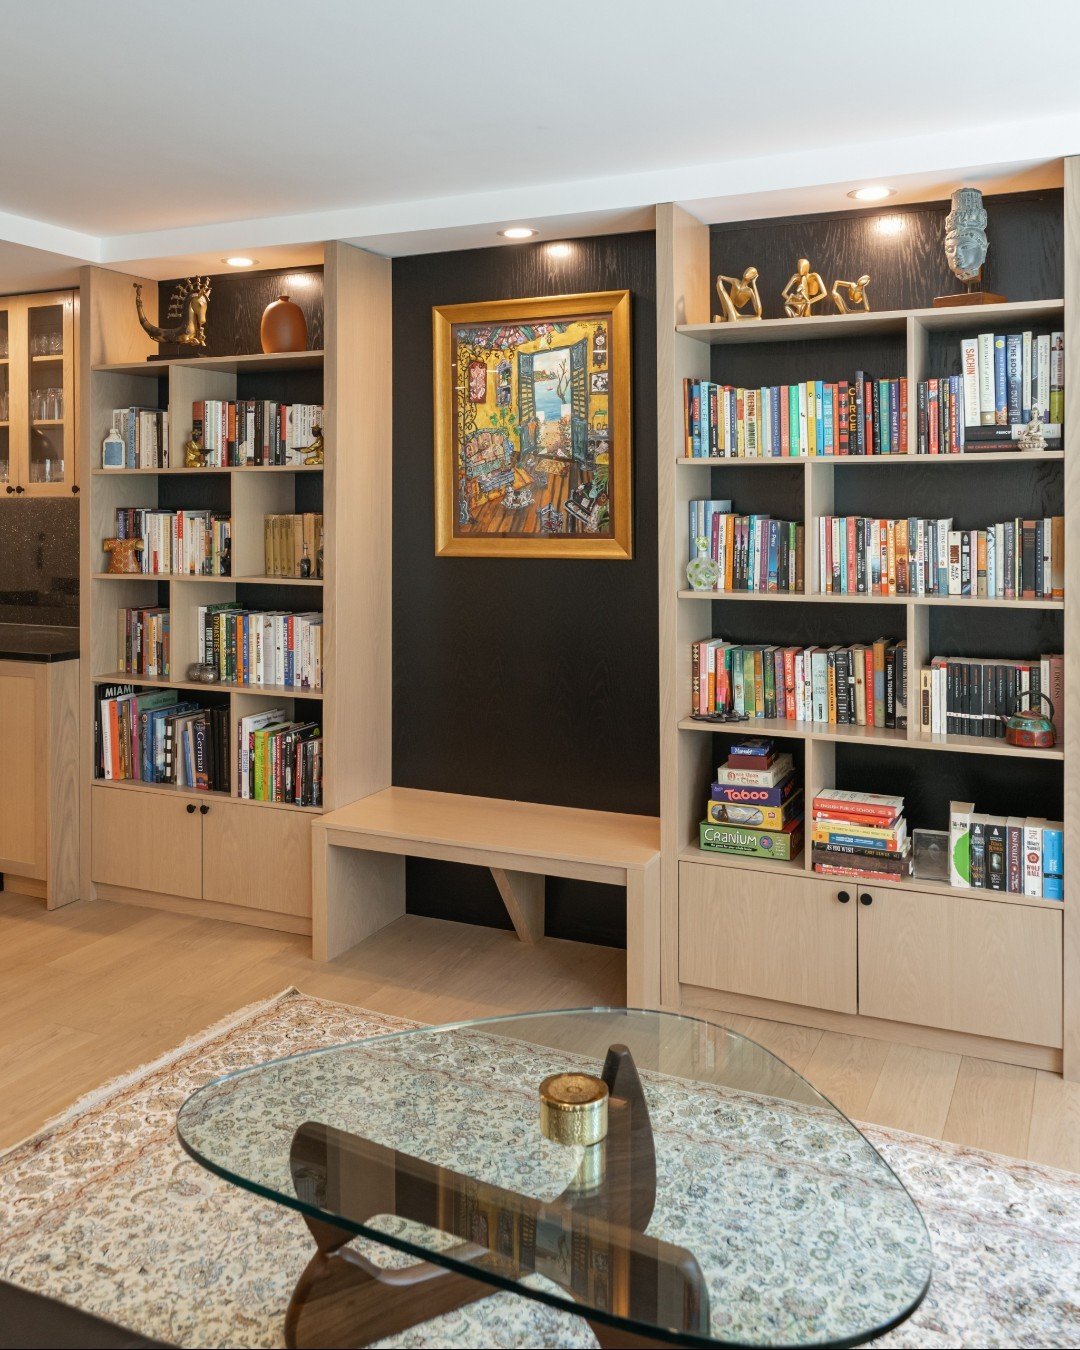 Tomorrow is World Book Day! 🌍📚✨

To celebrate let&rsquo;s remember the beautiful custom millwork unit we designed for our clients collection of books, art and sentimental items. We love how the white oak modular shelving with black stained backing 